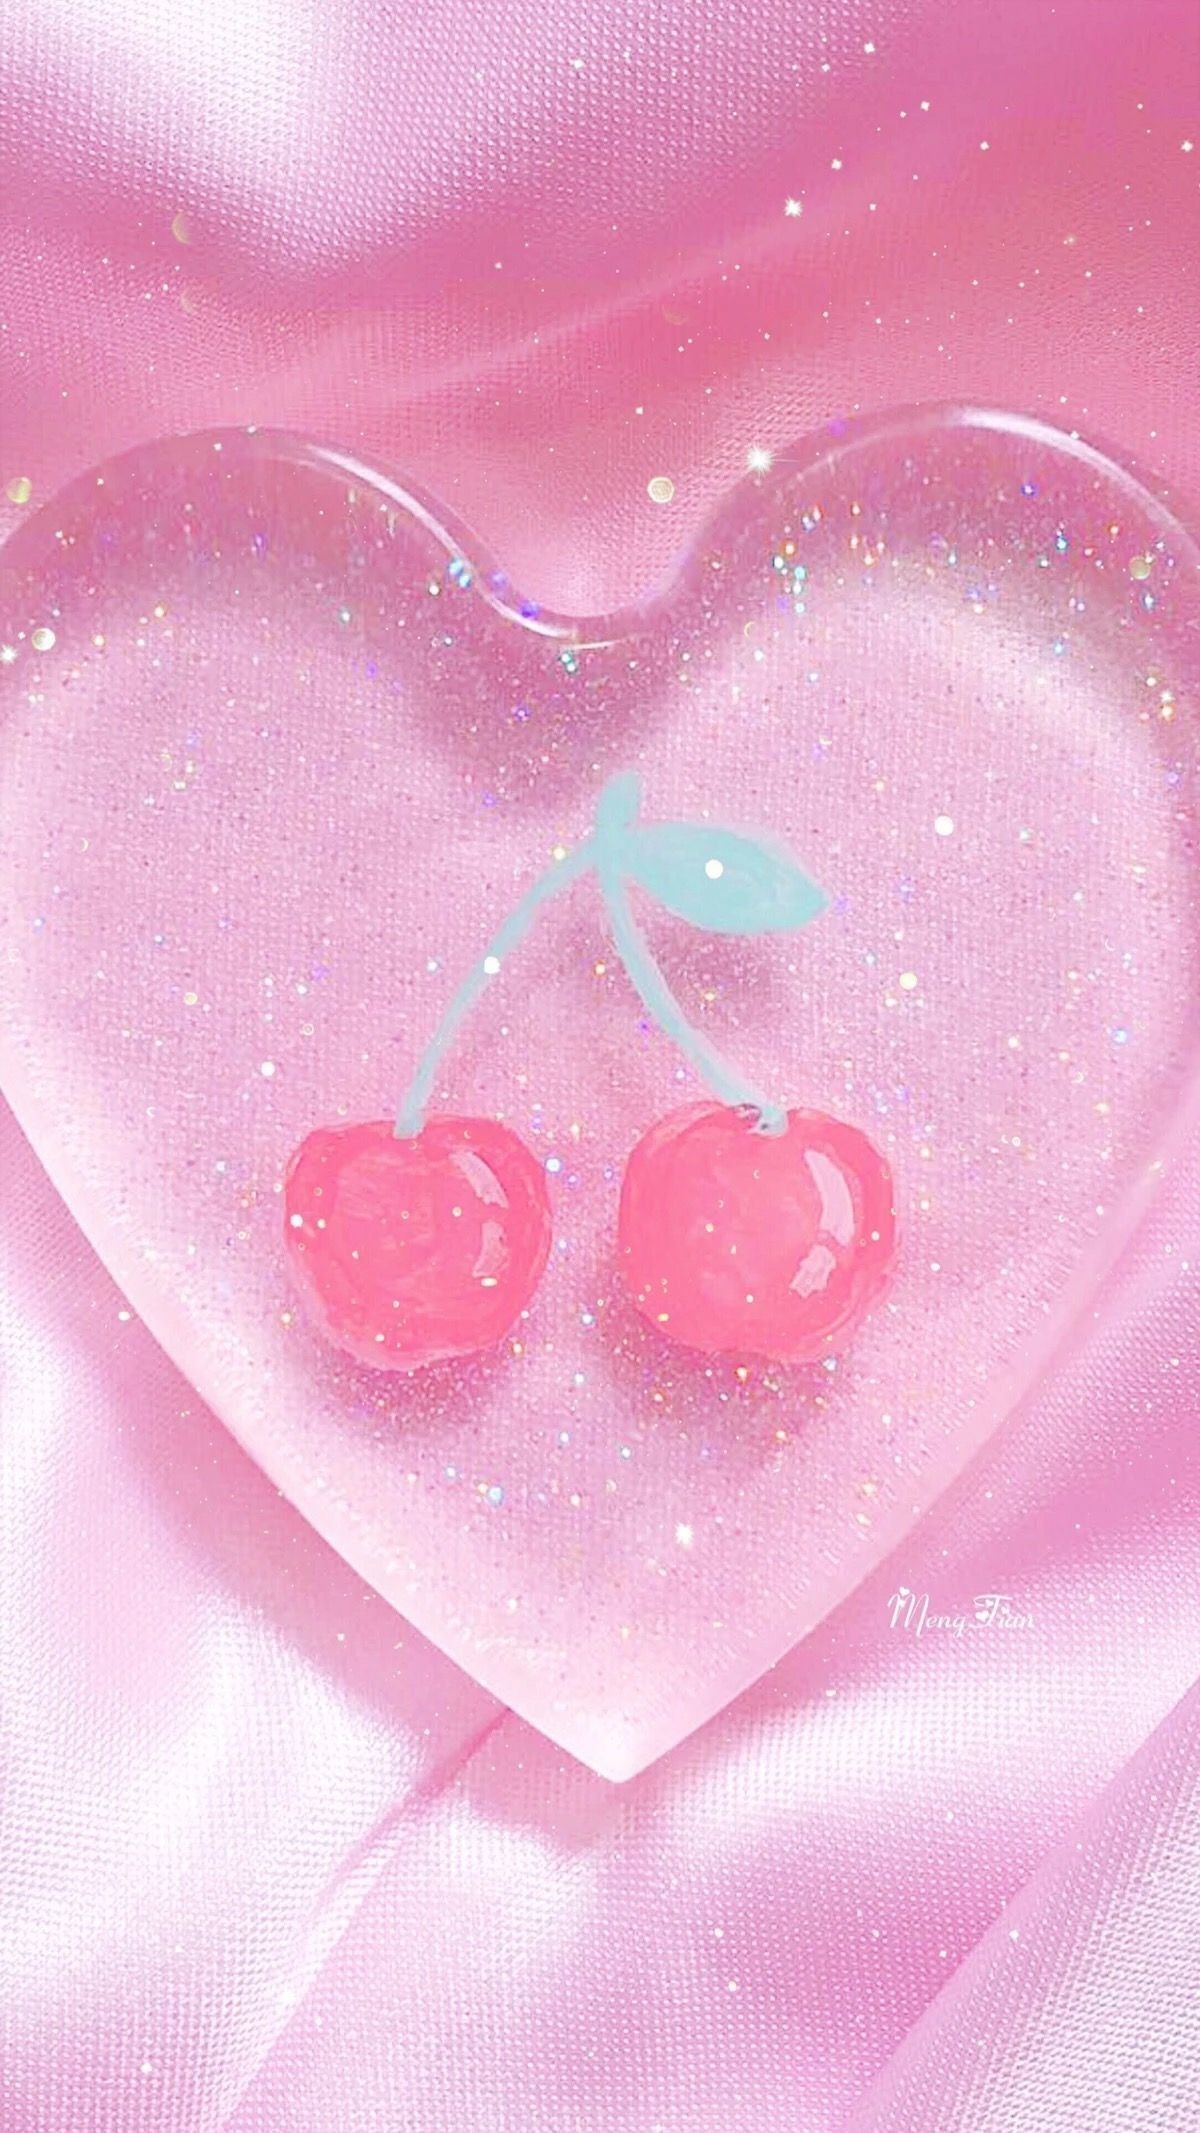 A heart shaped piece of glass with cherries on it - Lovecore, pastel pink, profile picture